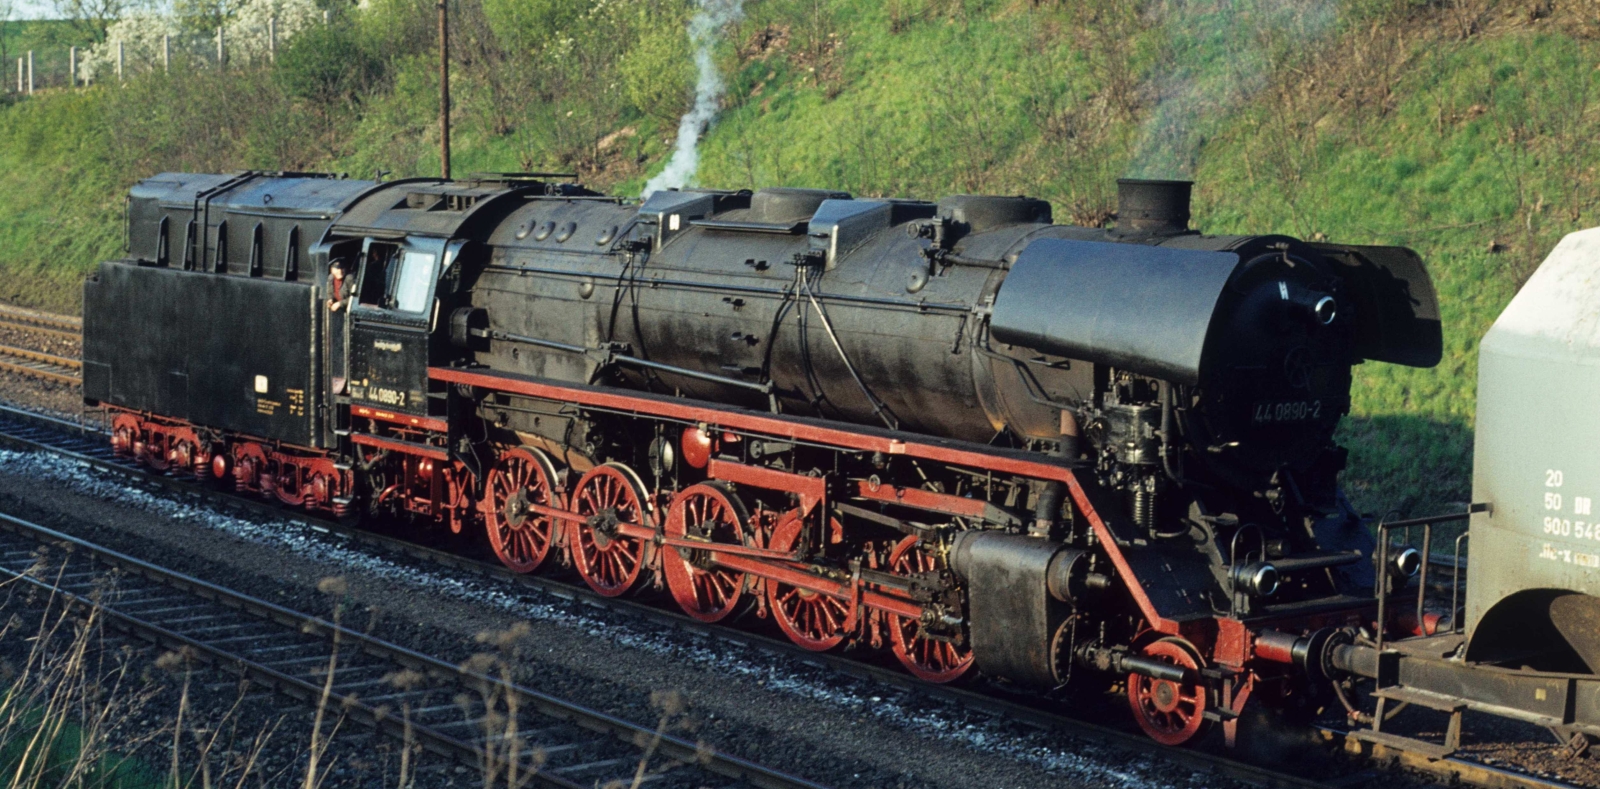 44 0890 of the Reichsbahn in May 1980